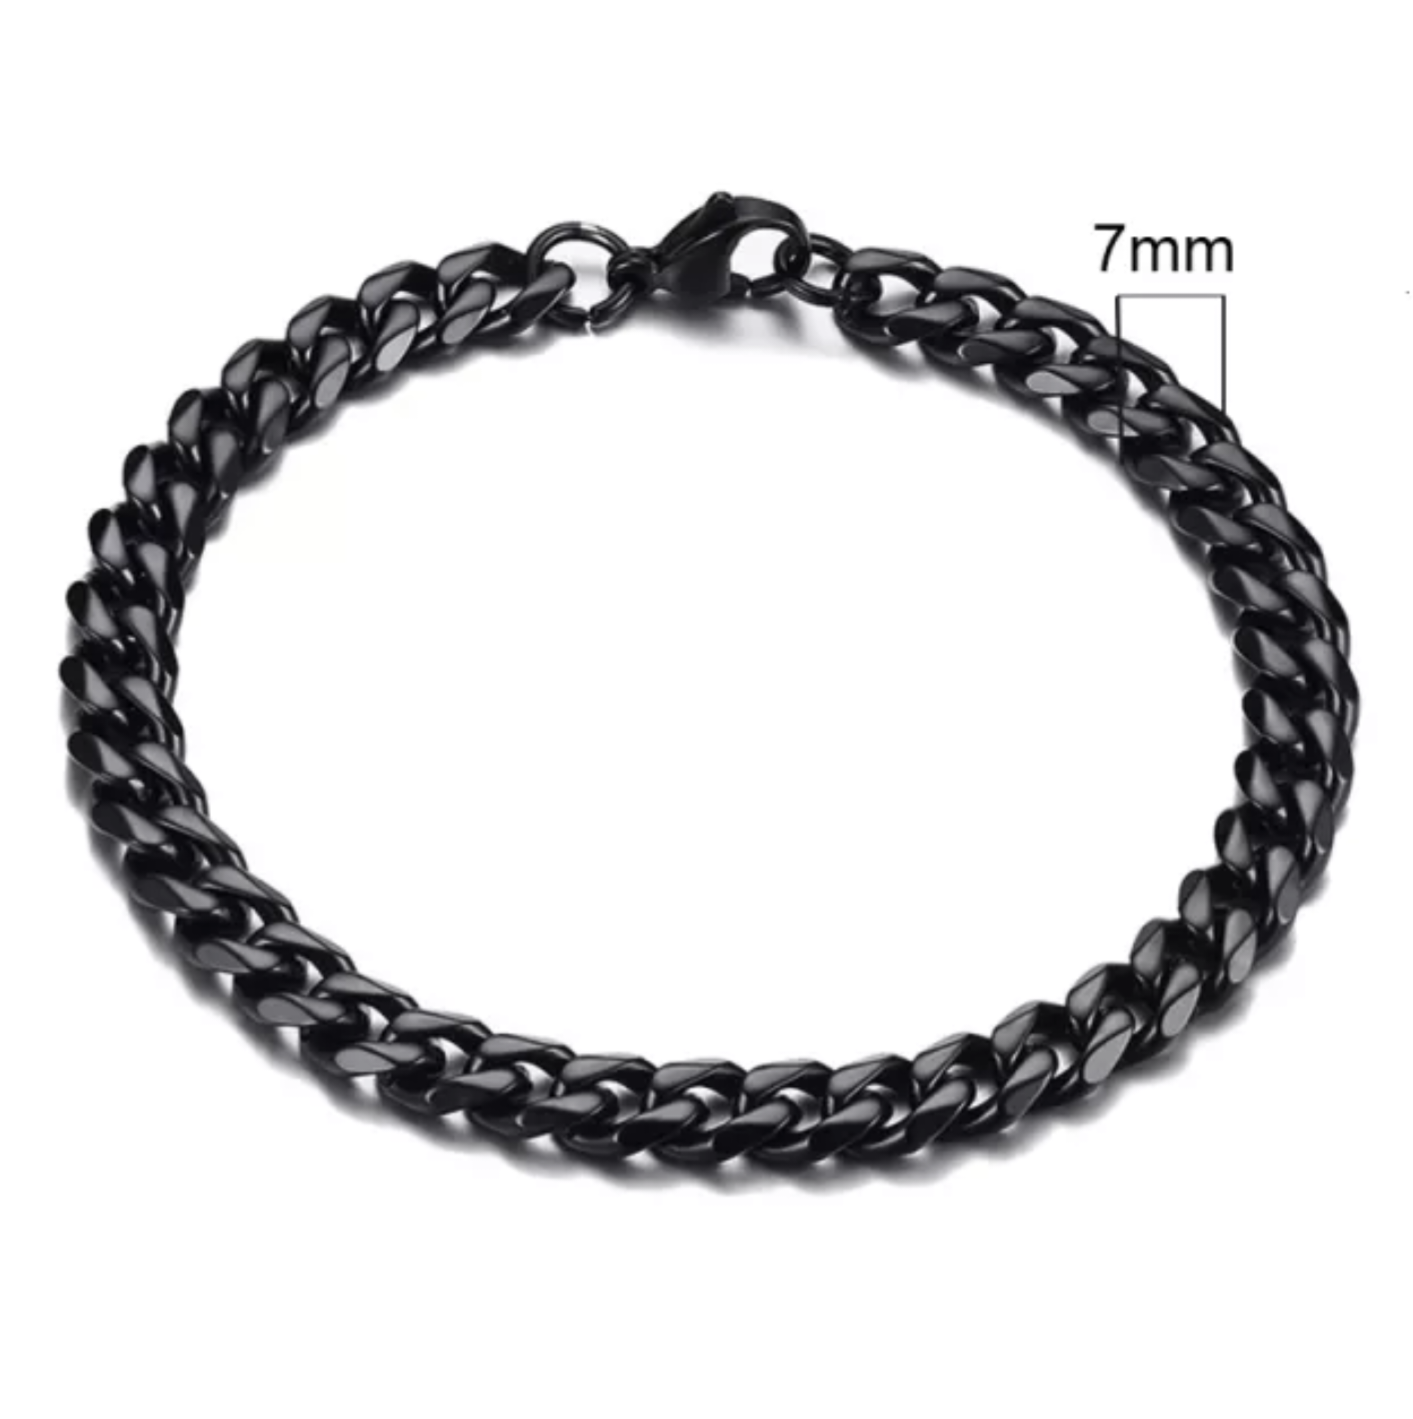 KAZI - Thick Chain Cuban Link Stainless Steel Bracelet - 3mm / 5mm / 7mm / 9mm / 11mm -  Everyday Essentials - Mens Gift - For Him